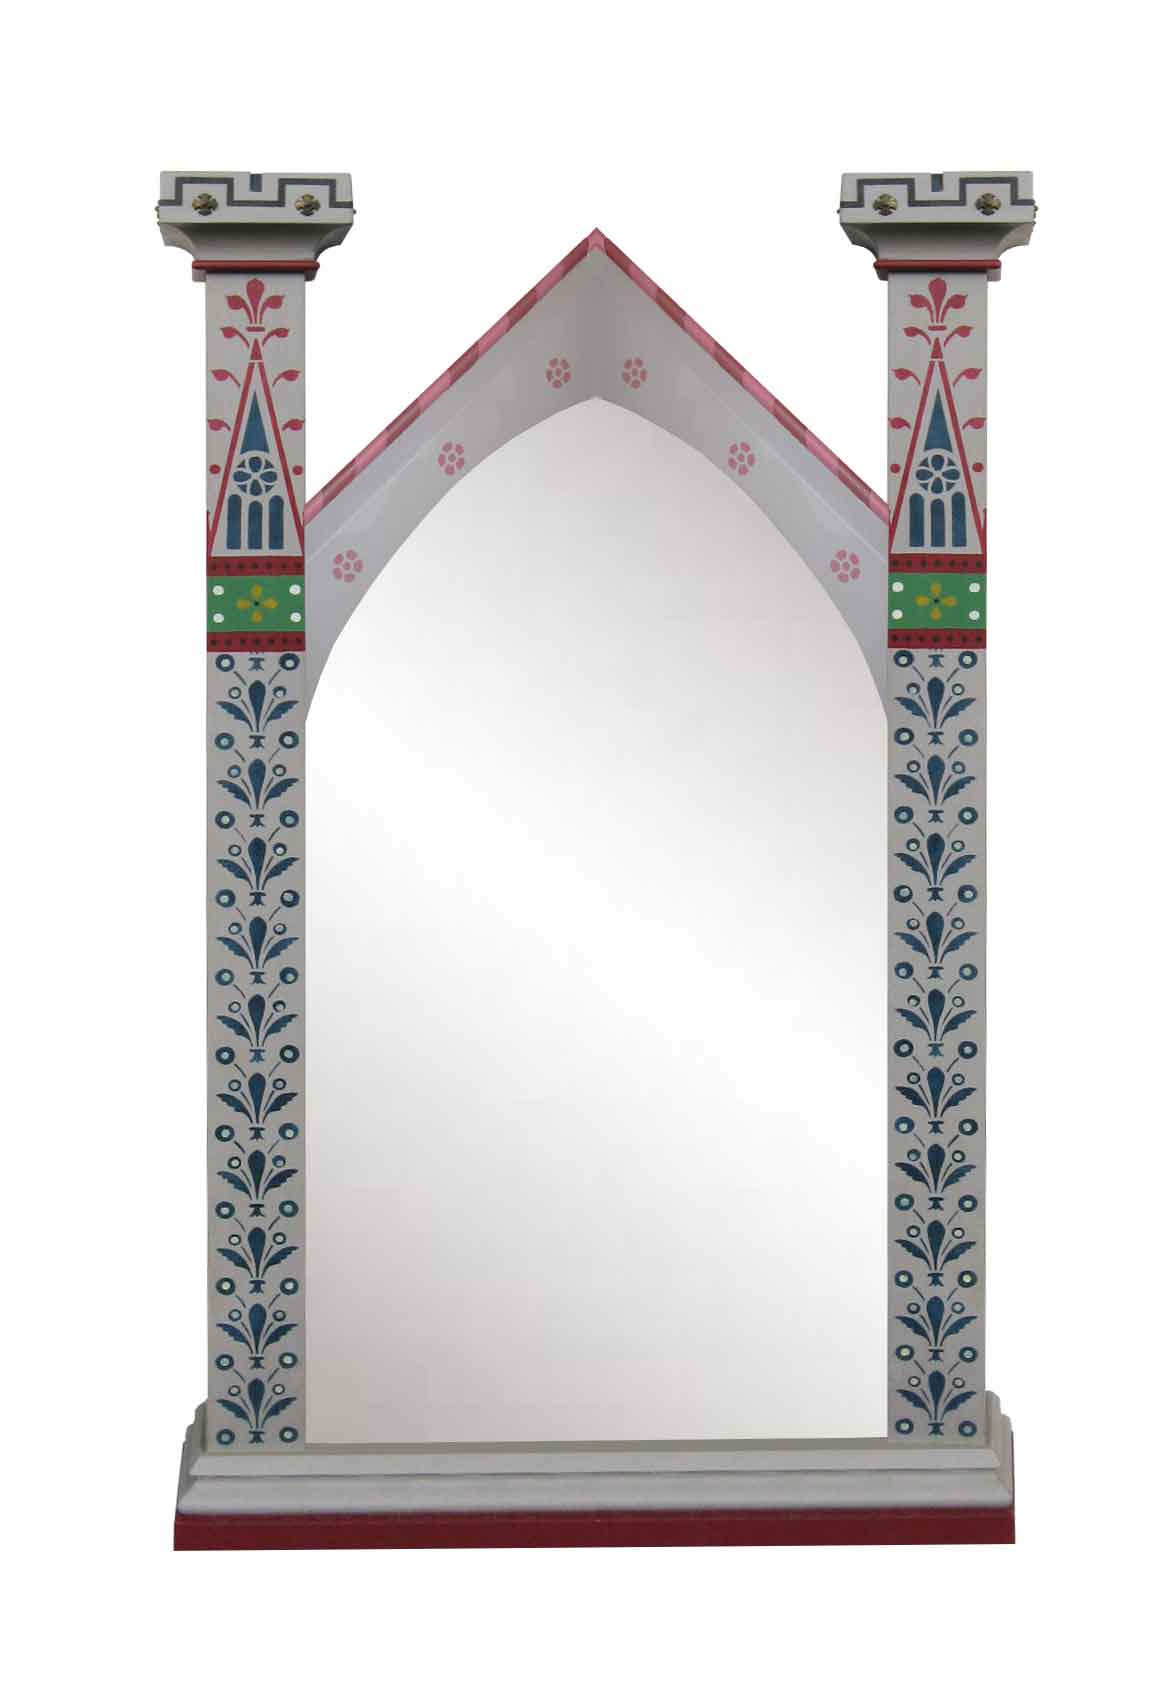 new Wm Burges style Painted Gothic Revival lancet shaped mirror frames with tall finials & stencilled gothic designs